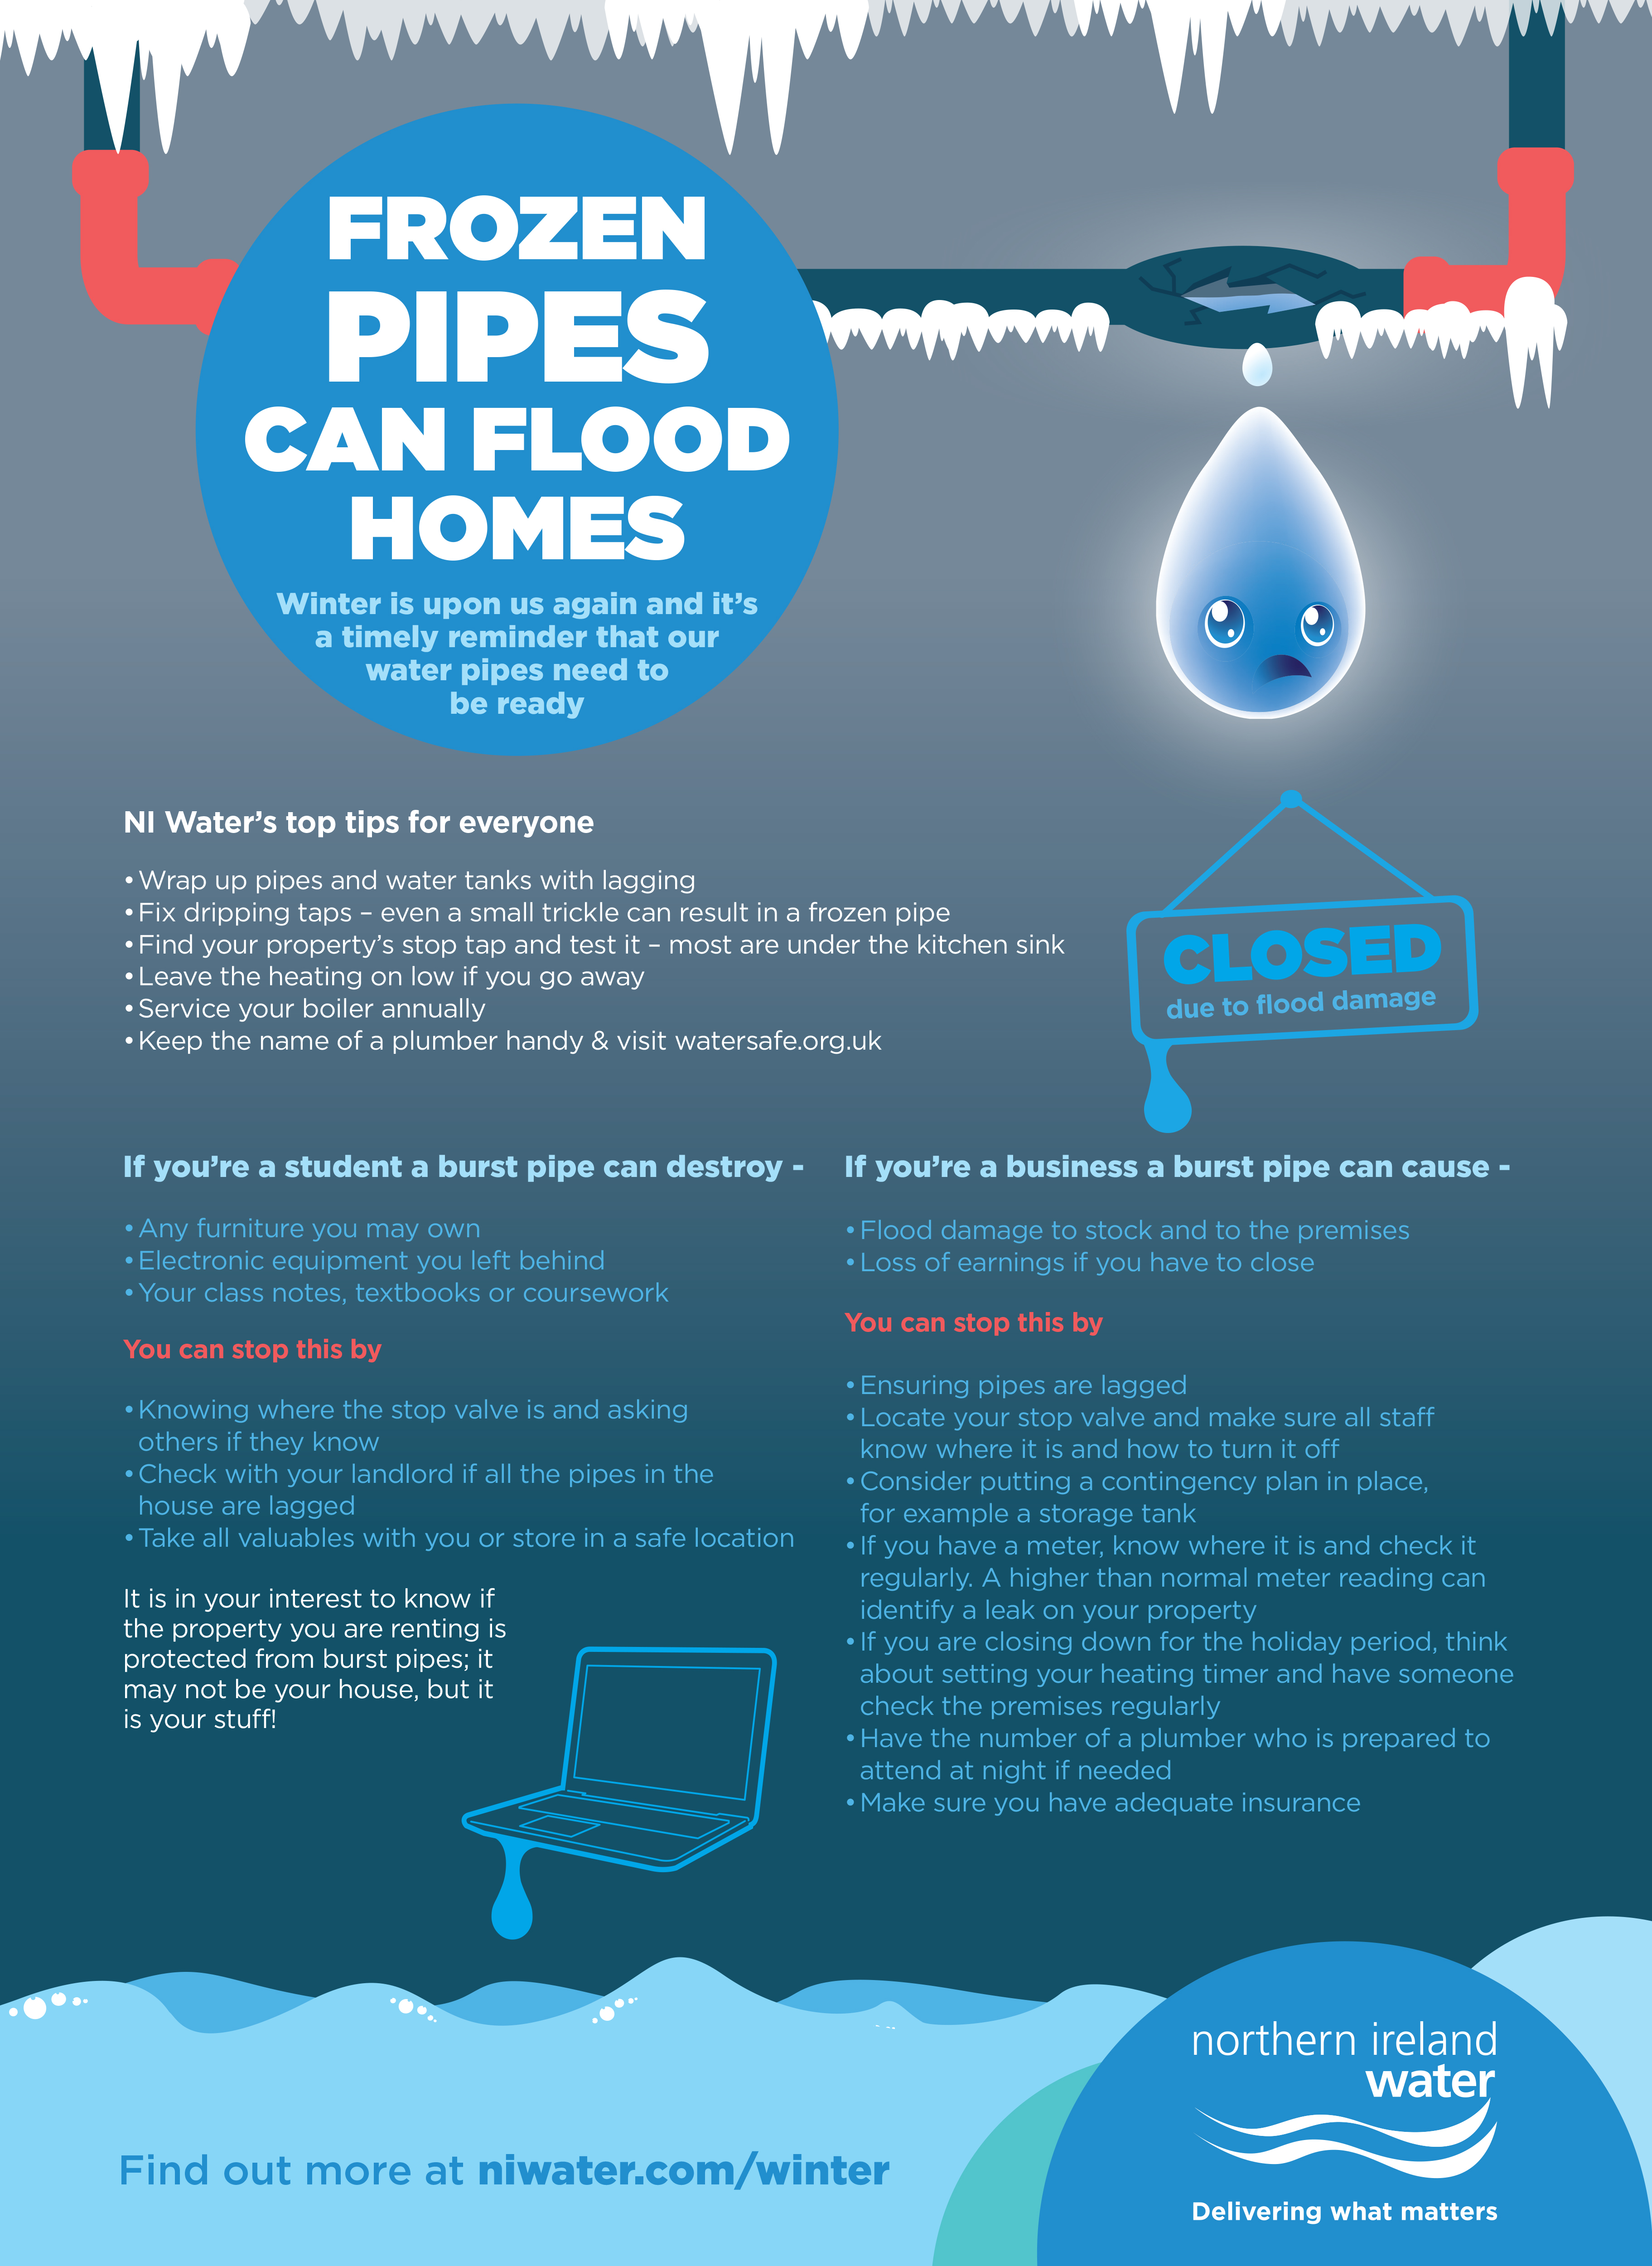 Frozen pipes can flood homes poster